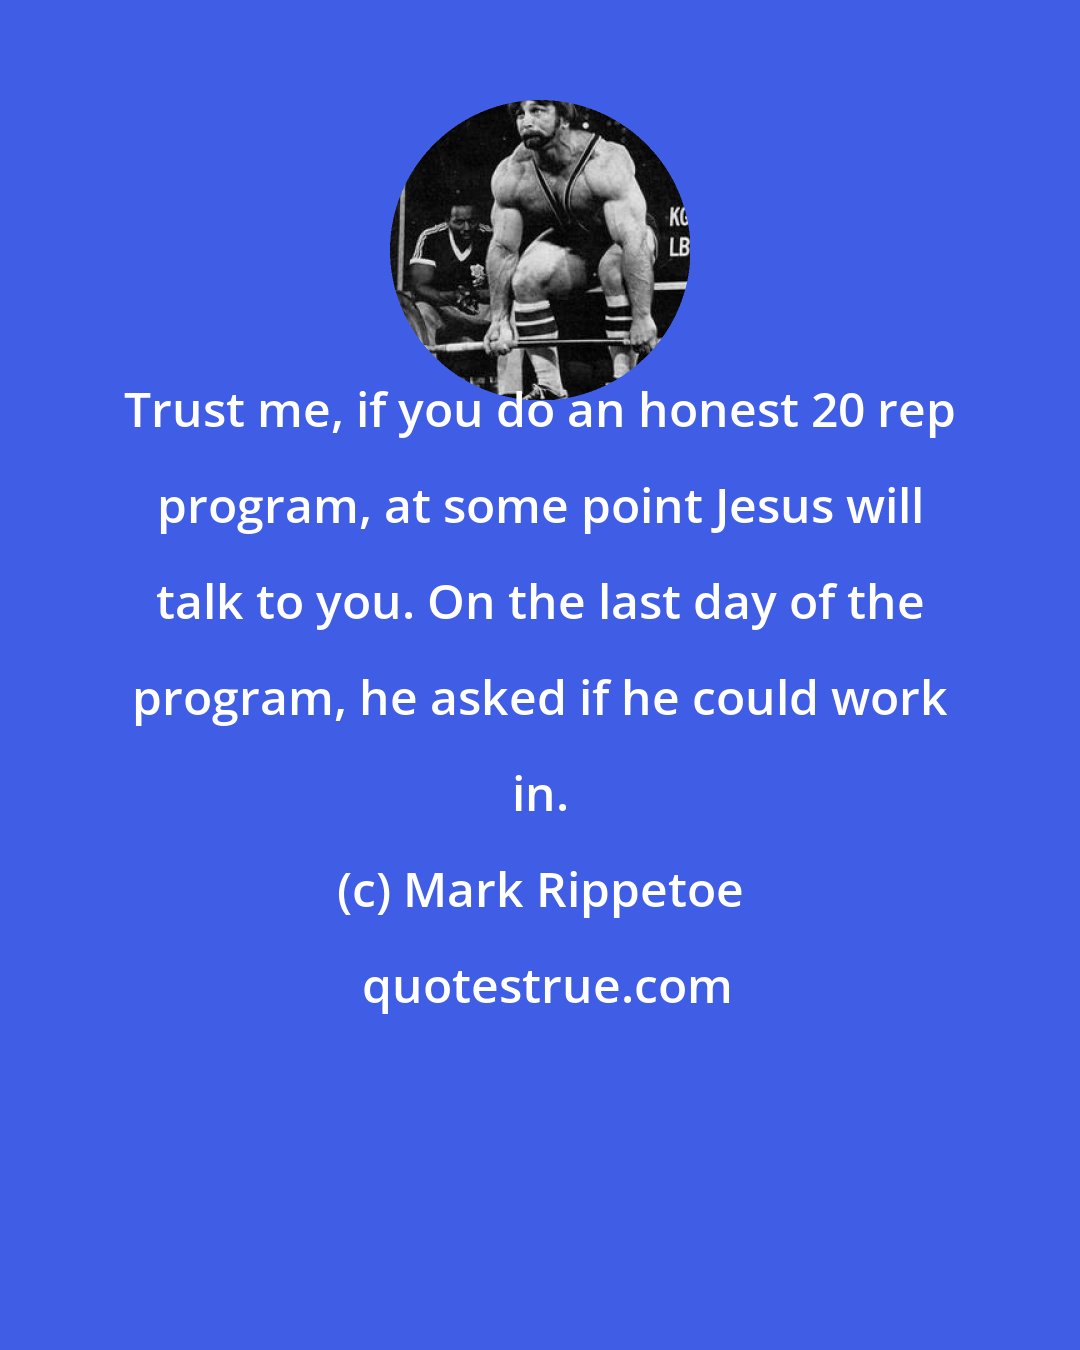 Mark Rippetoe: Trust me, if you do an honest 20 rep program, at some point Jesus will talk to you. On the last day of the program, he asked if he could work in.